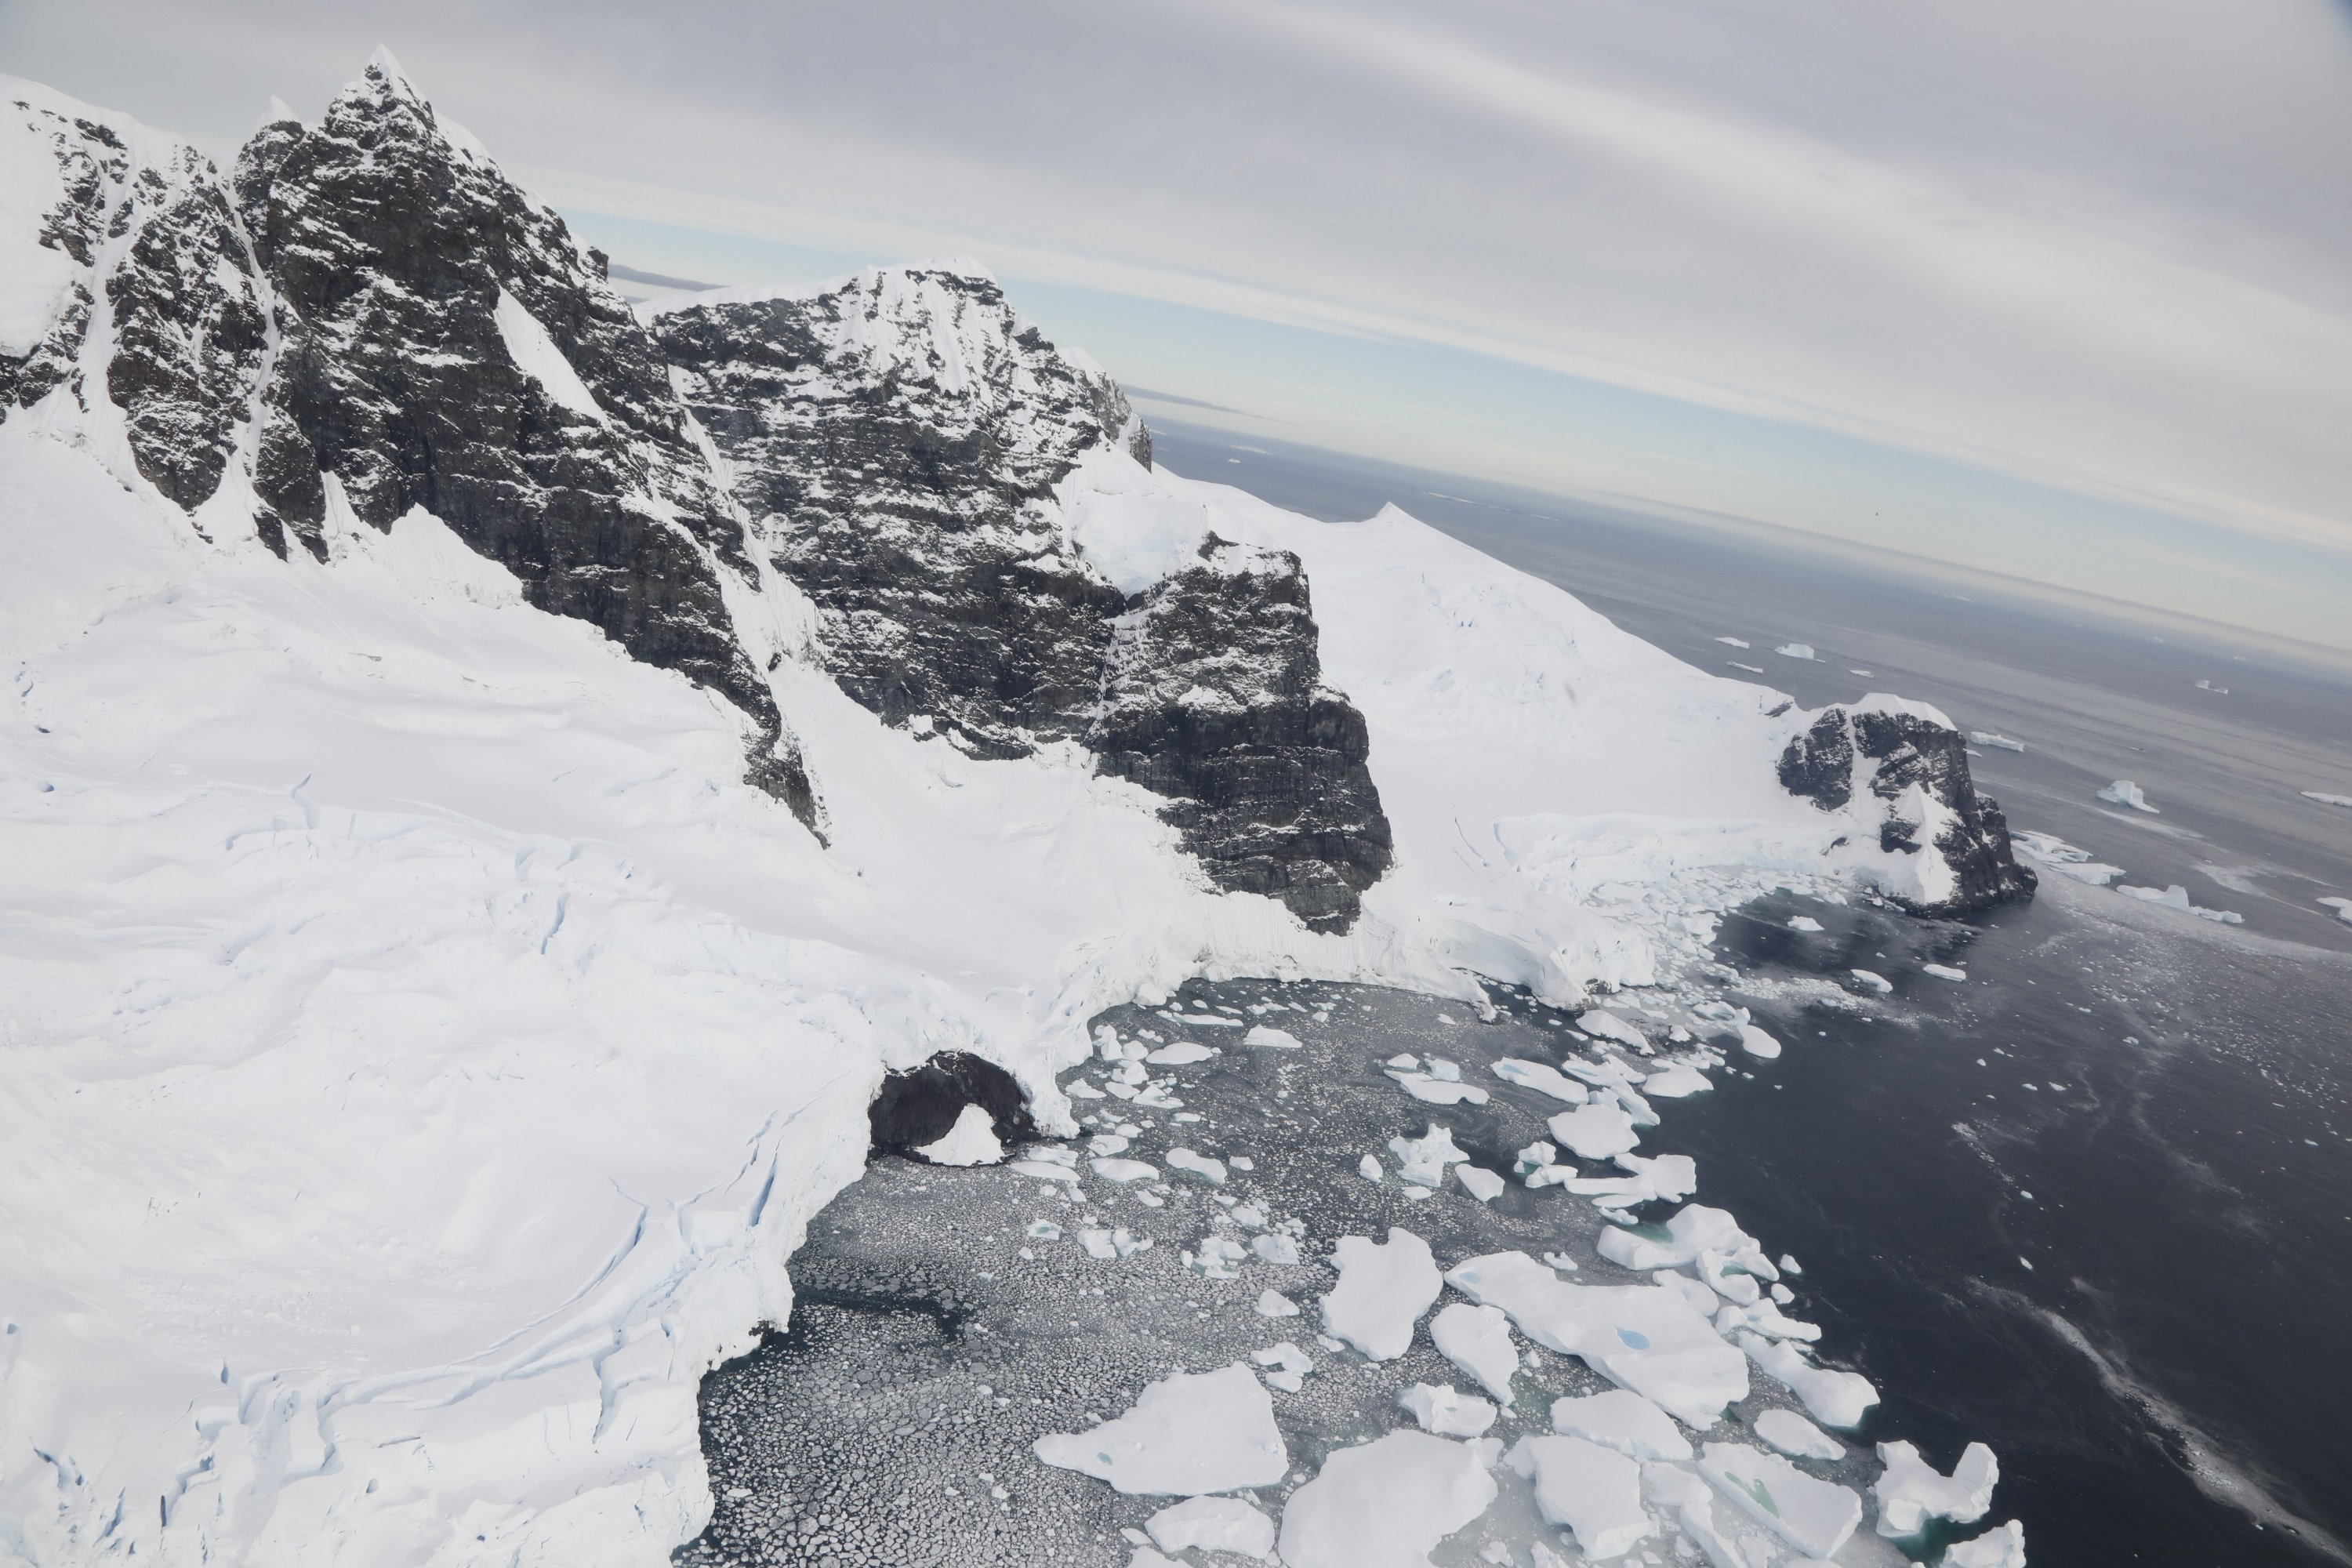 Snippets from Antarctica and its icy landscape. (Photo by Hayrettin Bektaş)